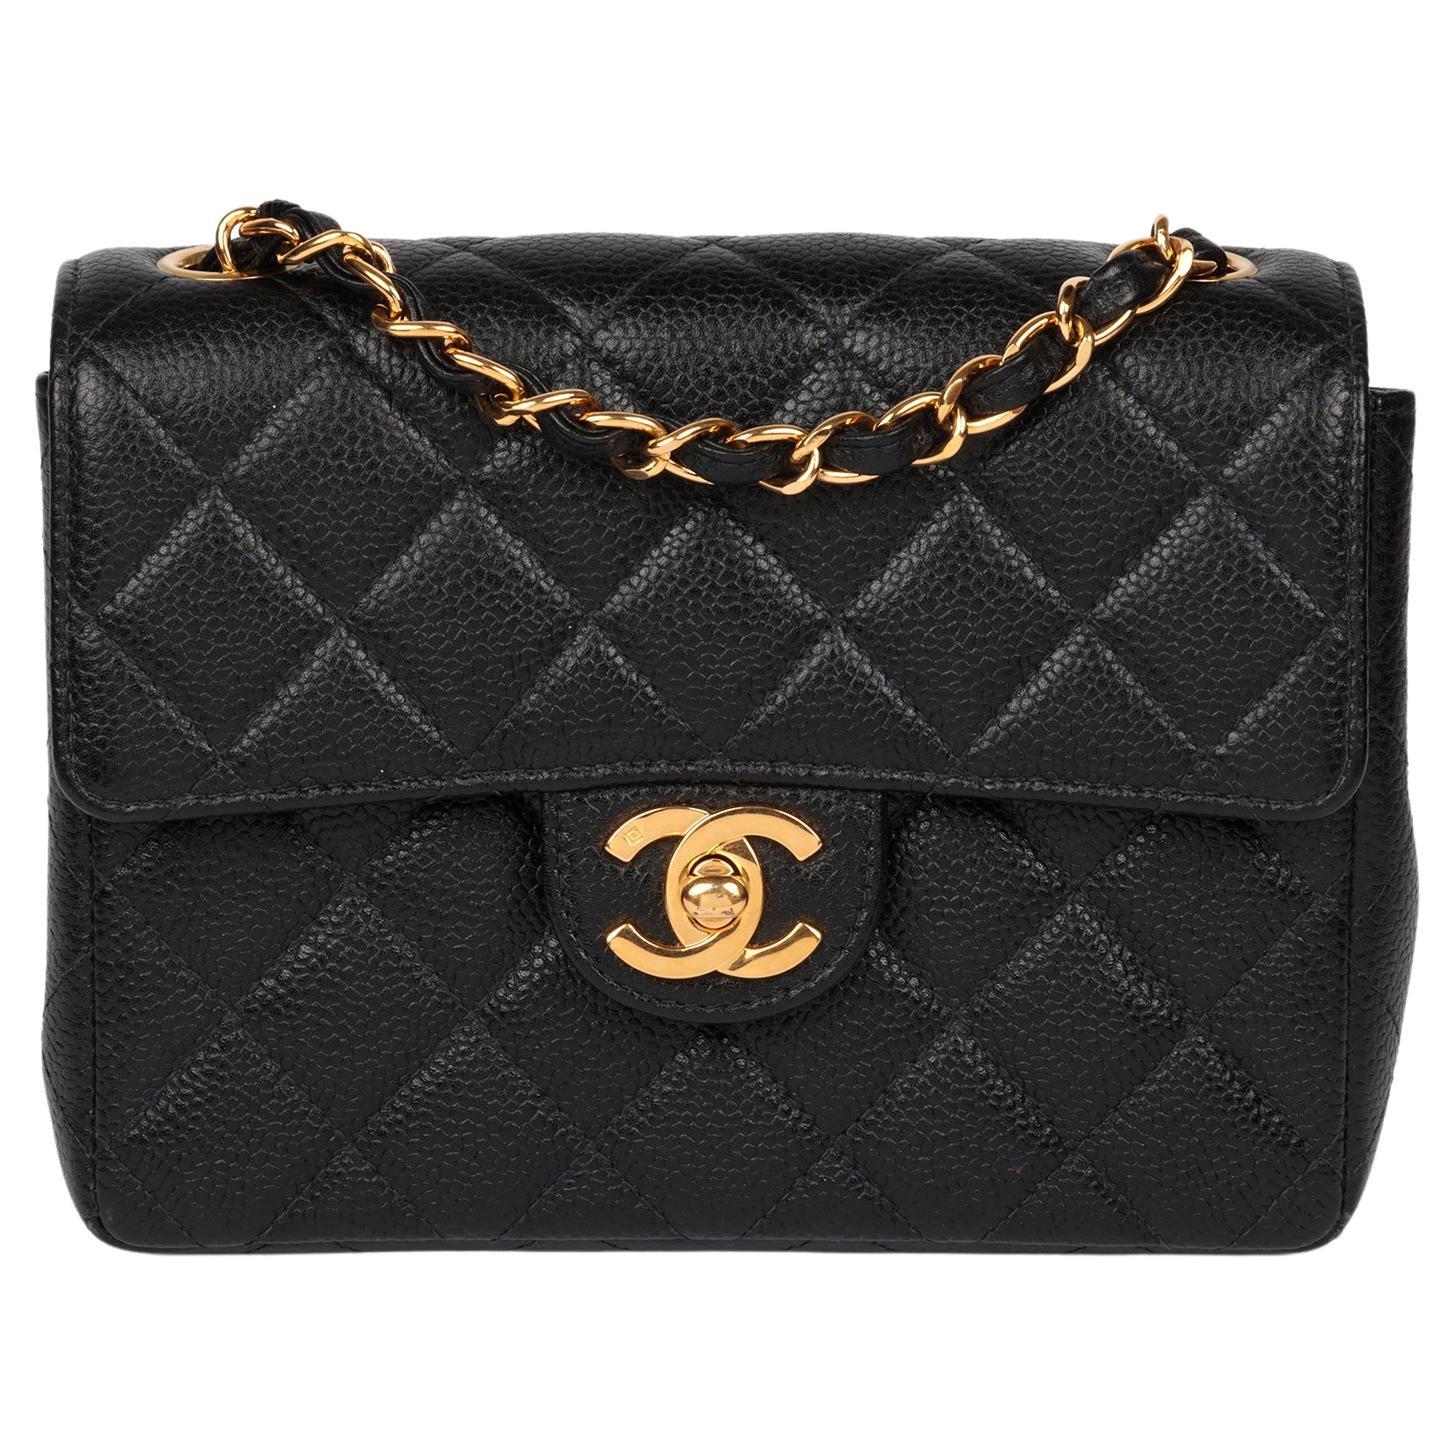 Chanel Black Quilted Caviar Leather Vintage Square Mini Flap Bag